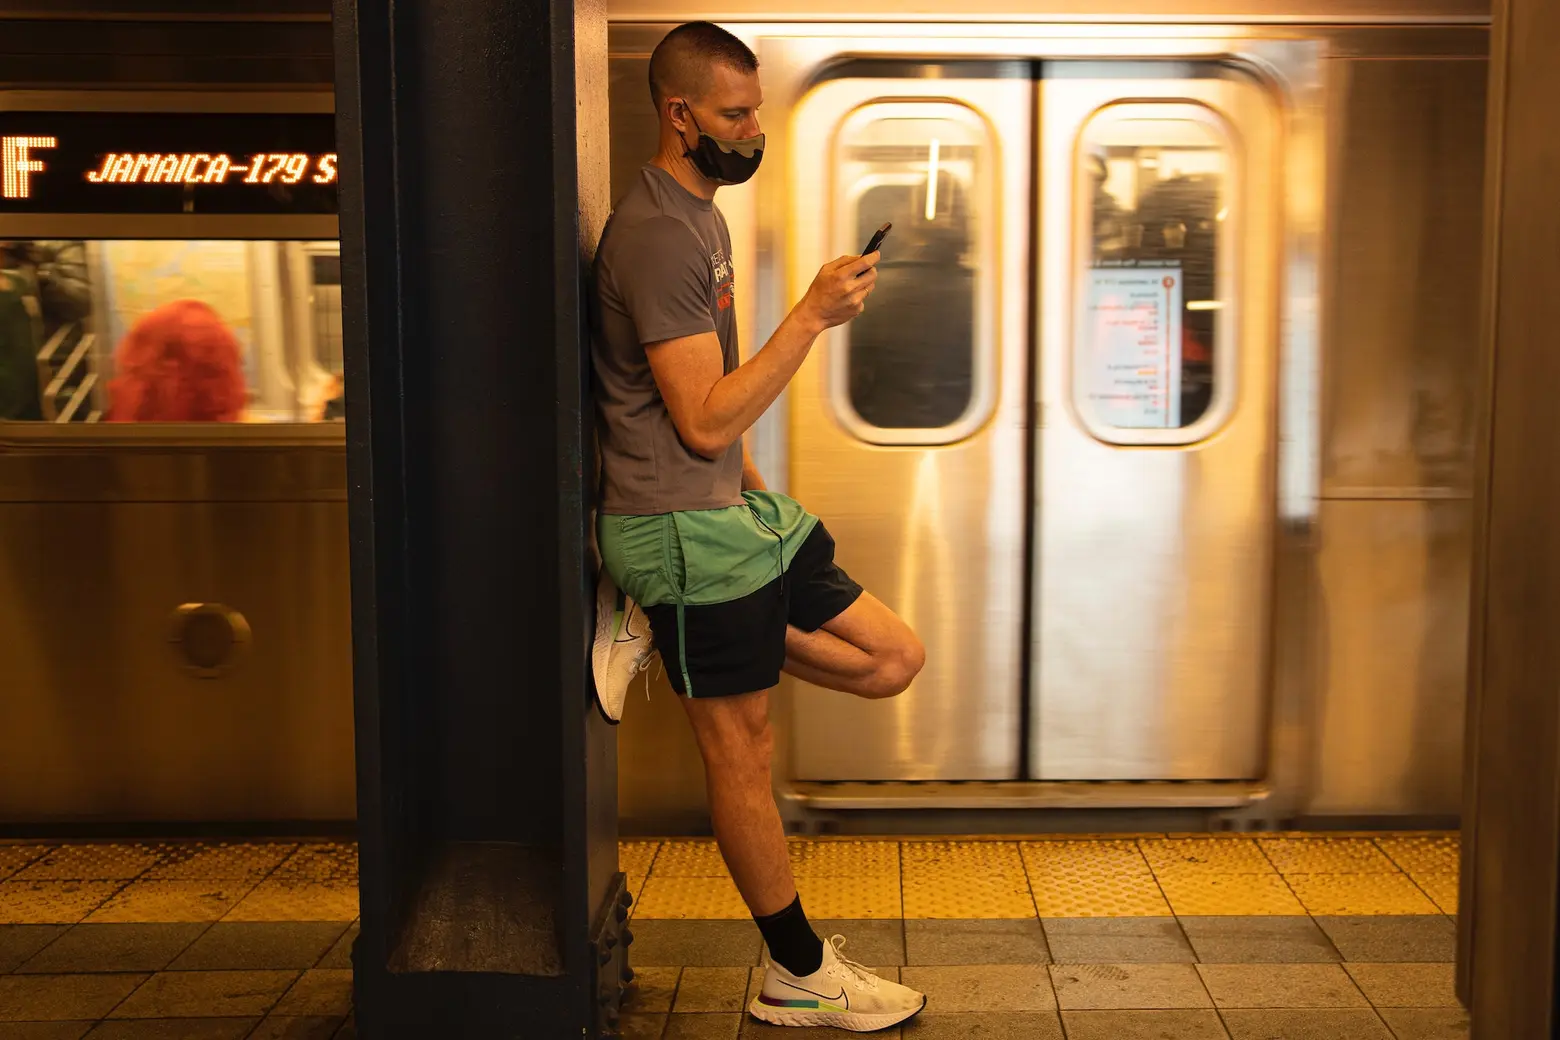 MTA proposal would expand cell phone service and Wi-Fi to entire subway system